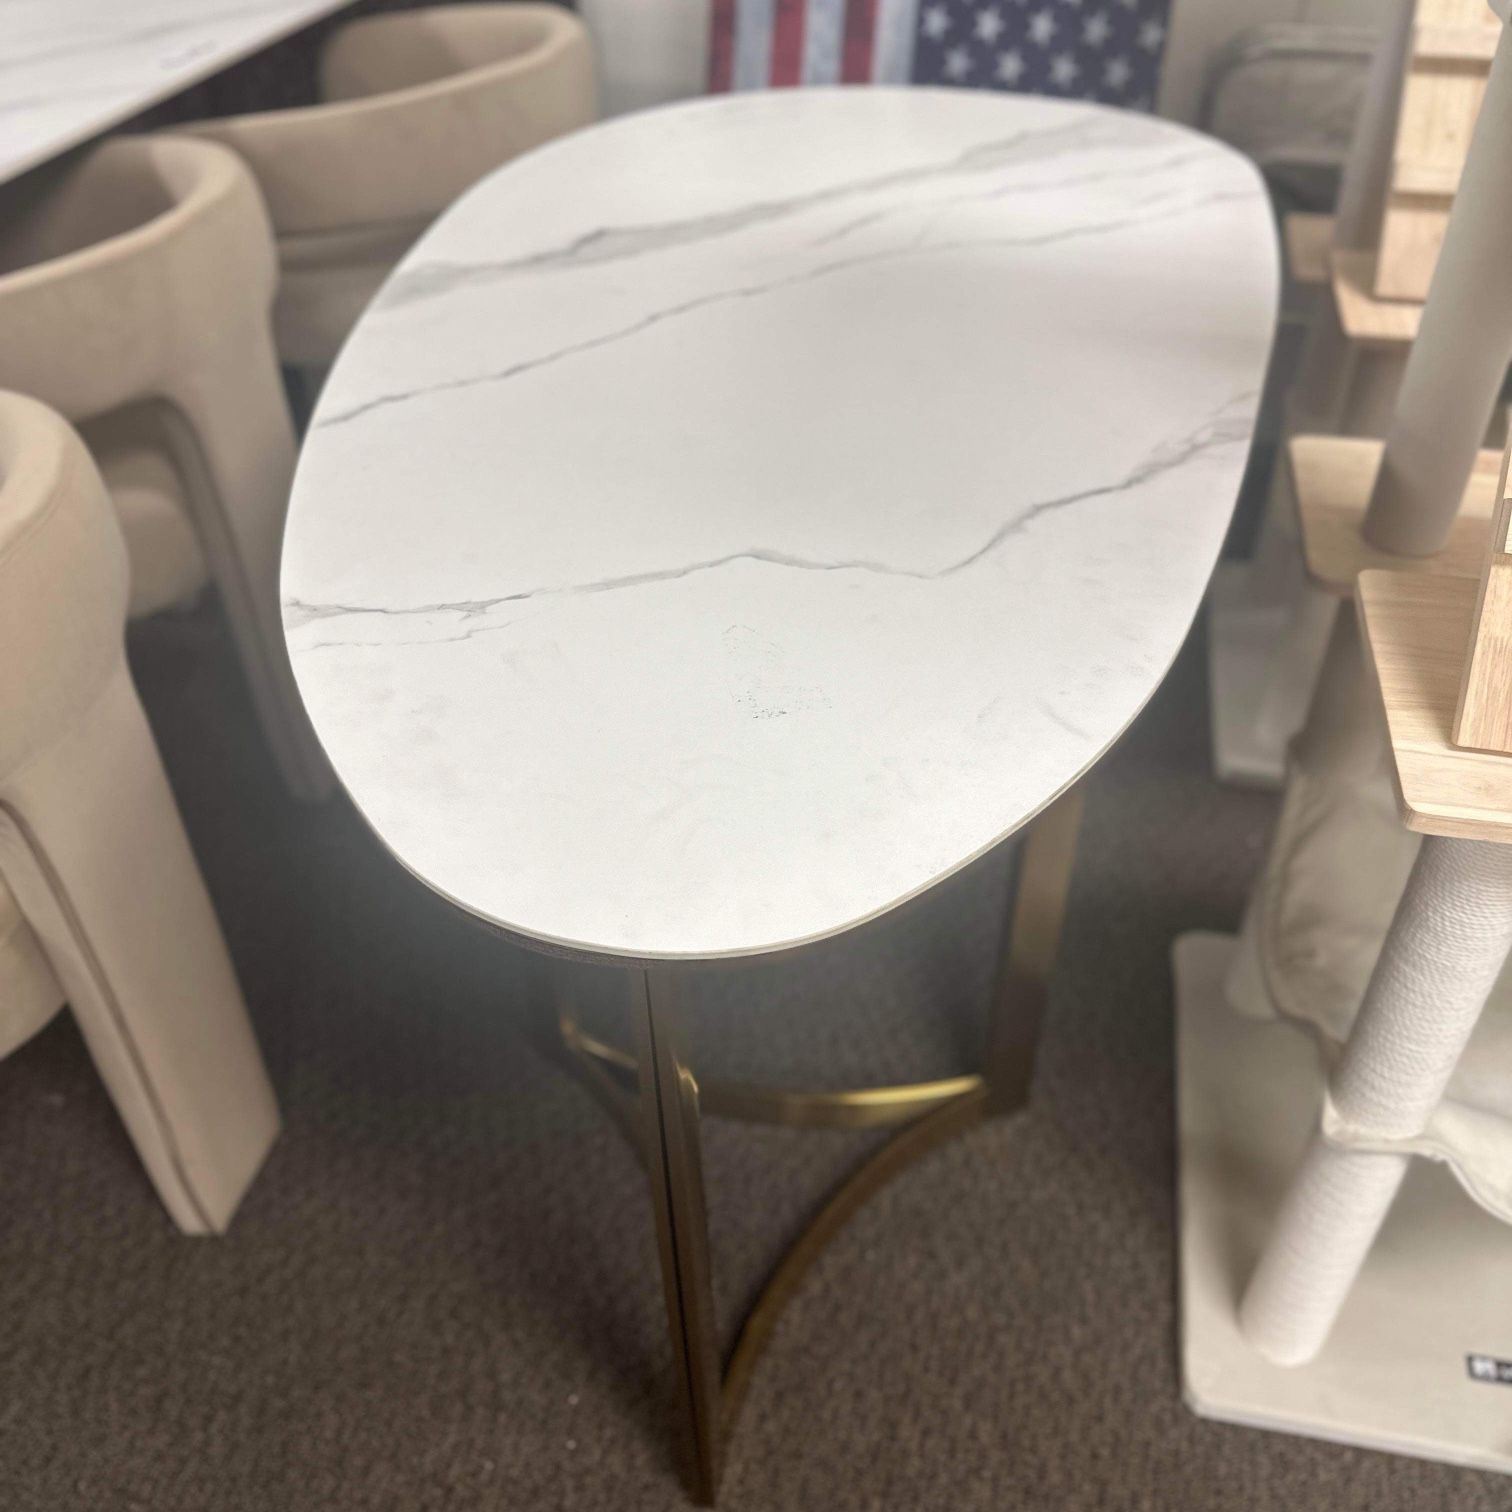 Oval White Marble and Metal Leg Dining Table (L: 55inches W: 30.5inches H: 29inches) 